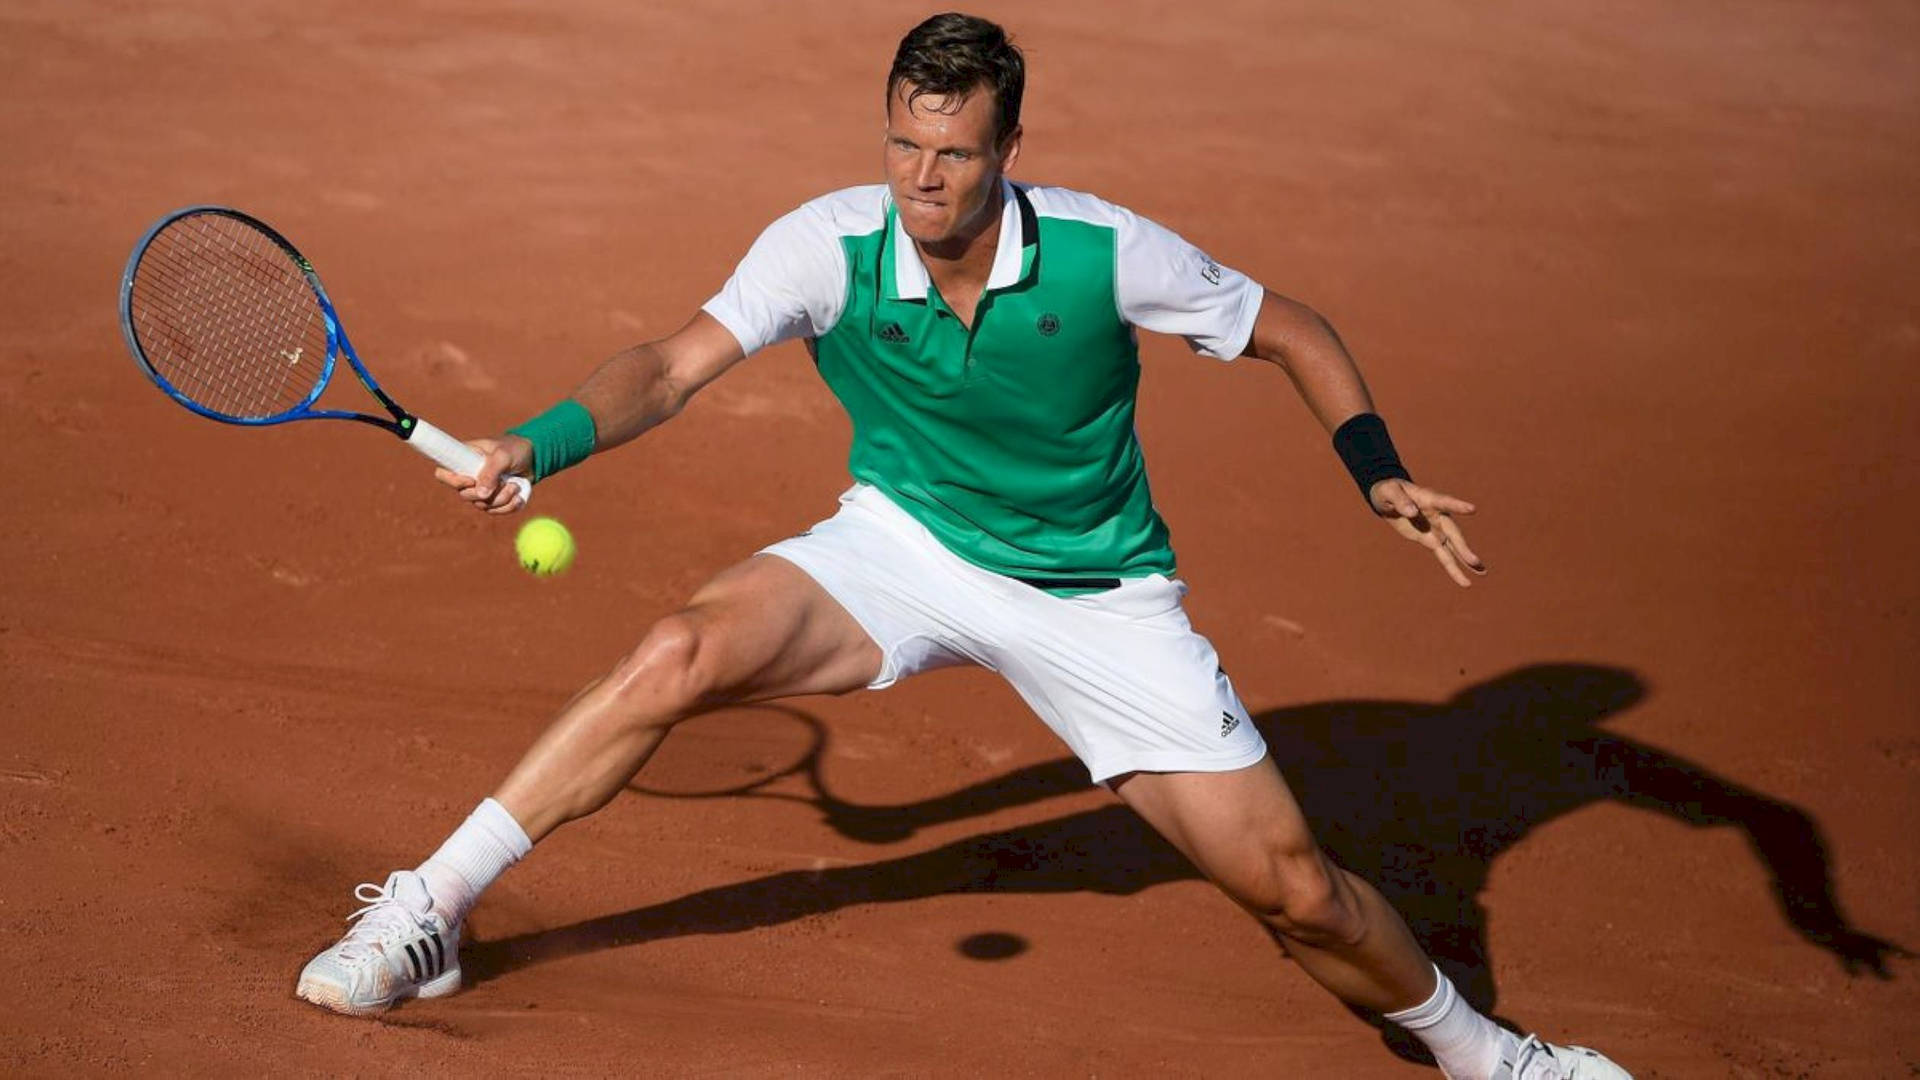 Tomas Berdych Trying To Hit Ball Wallpaper